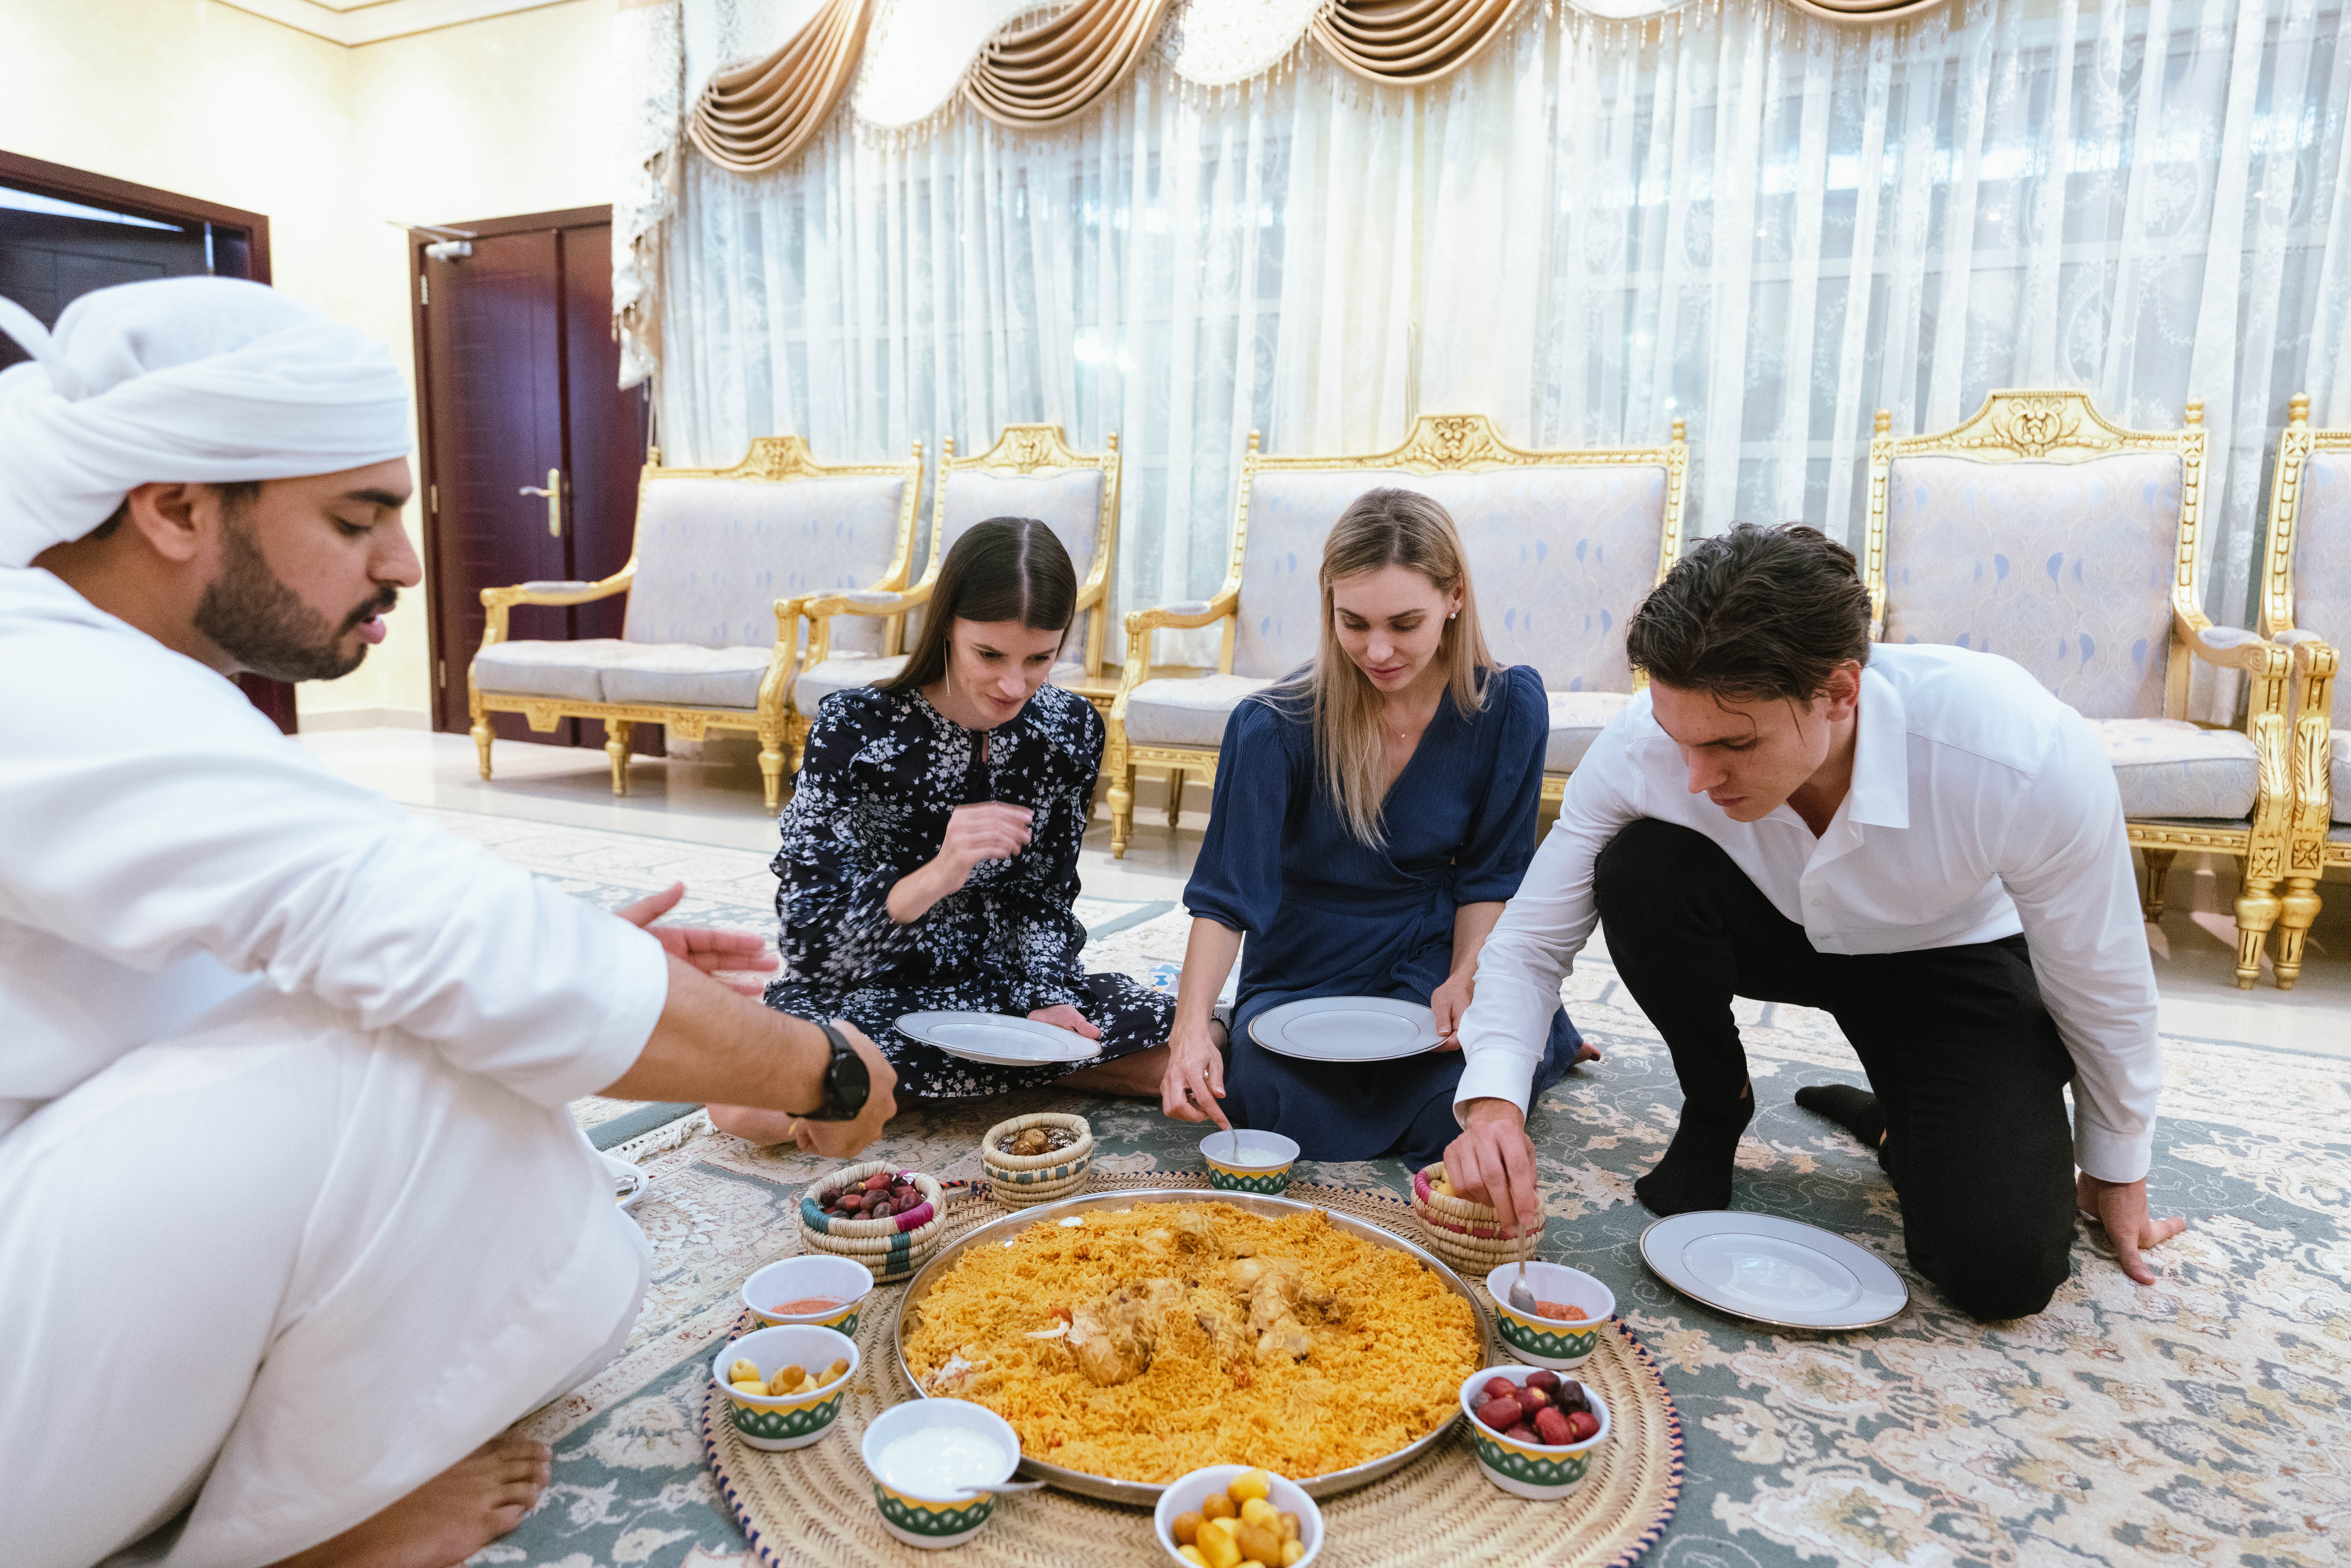 Have a traditional meal with an Emirati